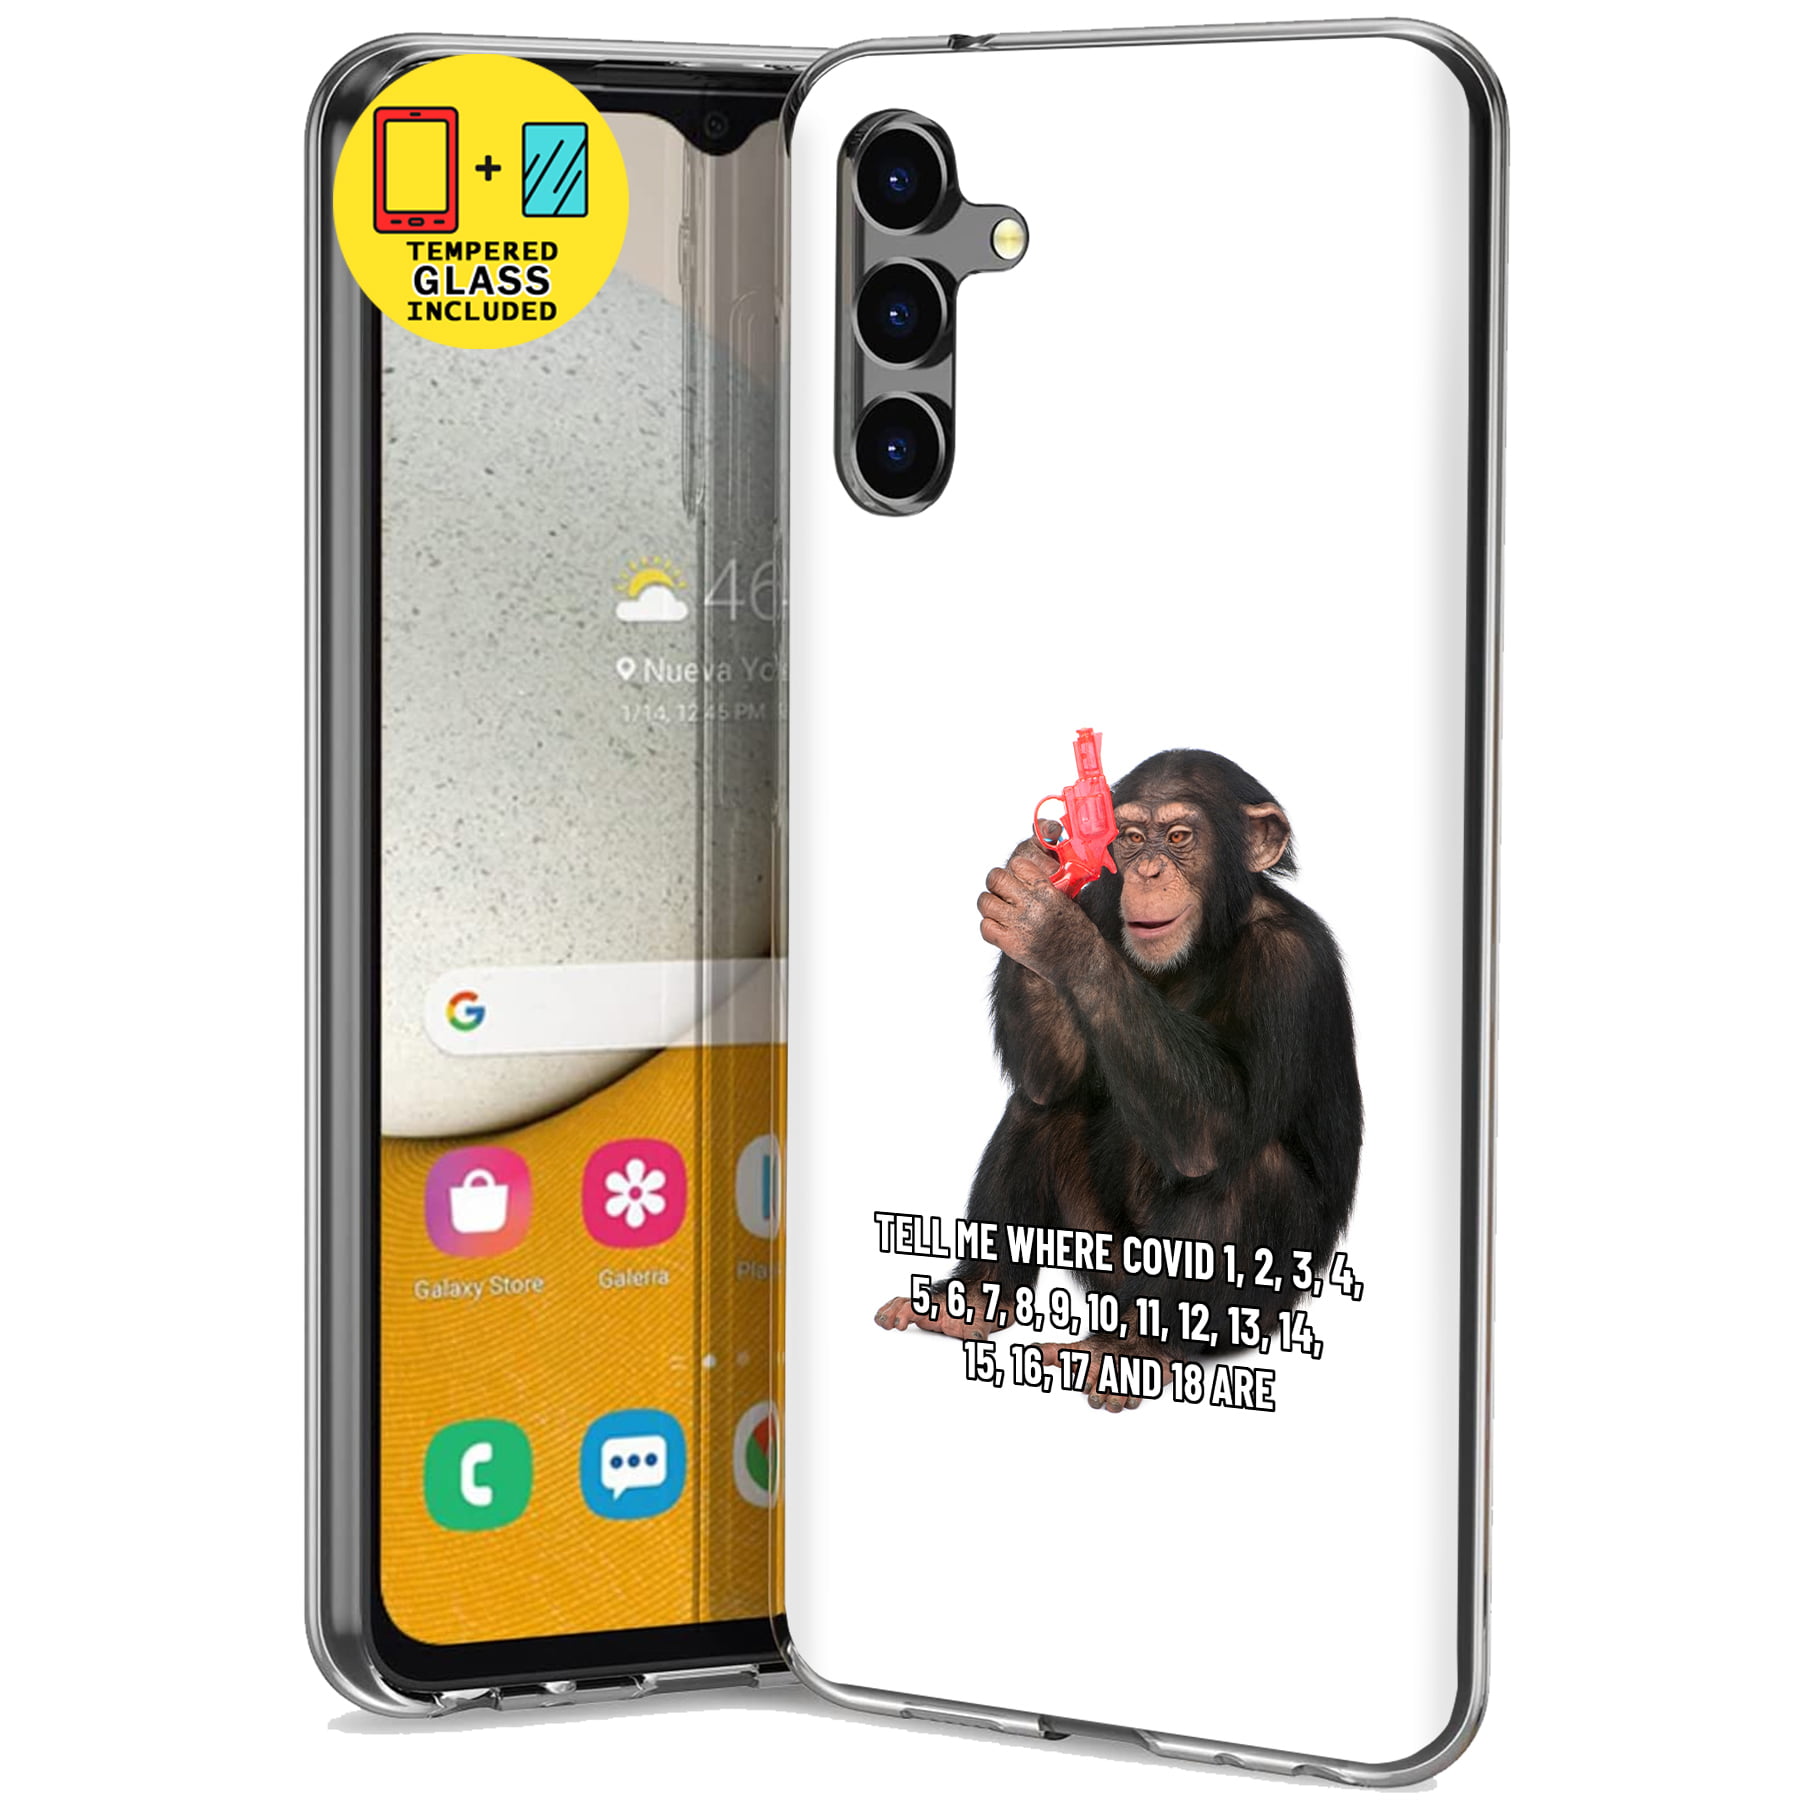 TalkingCase Slim Case Compatible for Samsung Galaxy A13 5G, Glass Screen  Protector Incl, Funny Meme Tell Me Print, Lightweight, Flexible, Soft, USA  